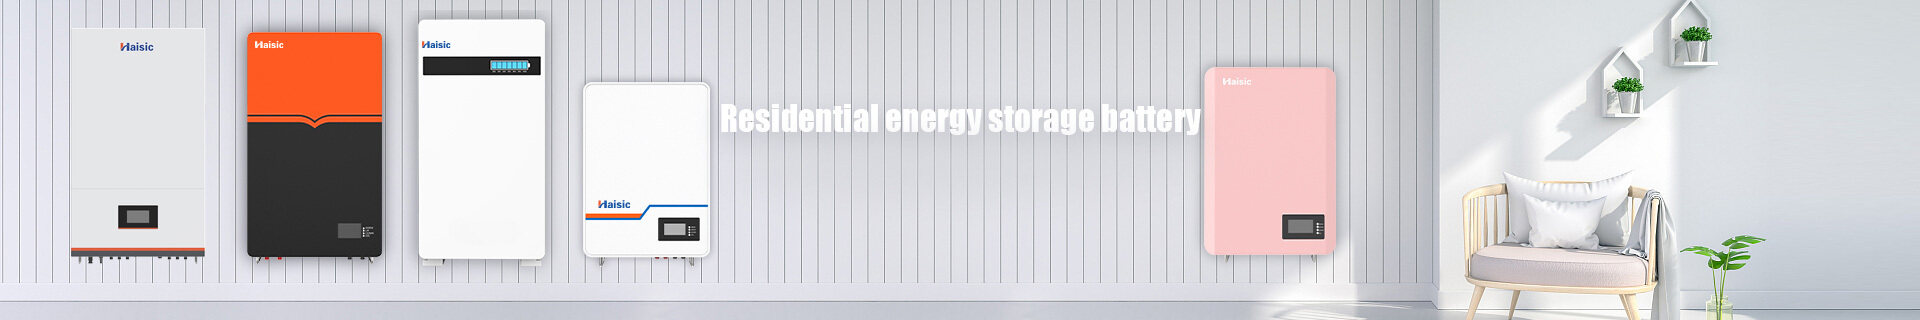 home energy storage system factory,home energy storage systems companies,home energy storage system suppliers